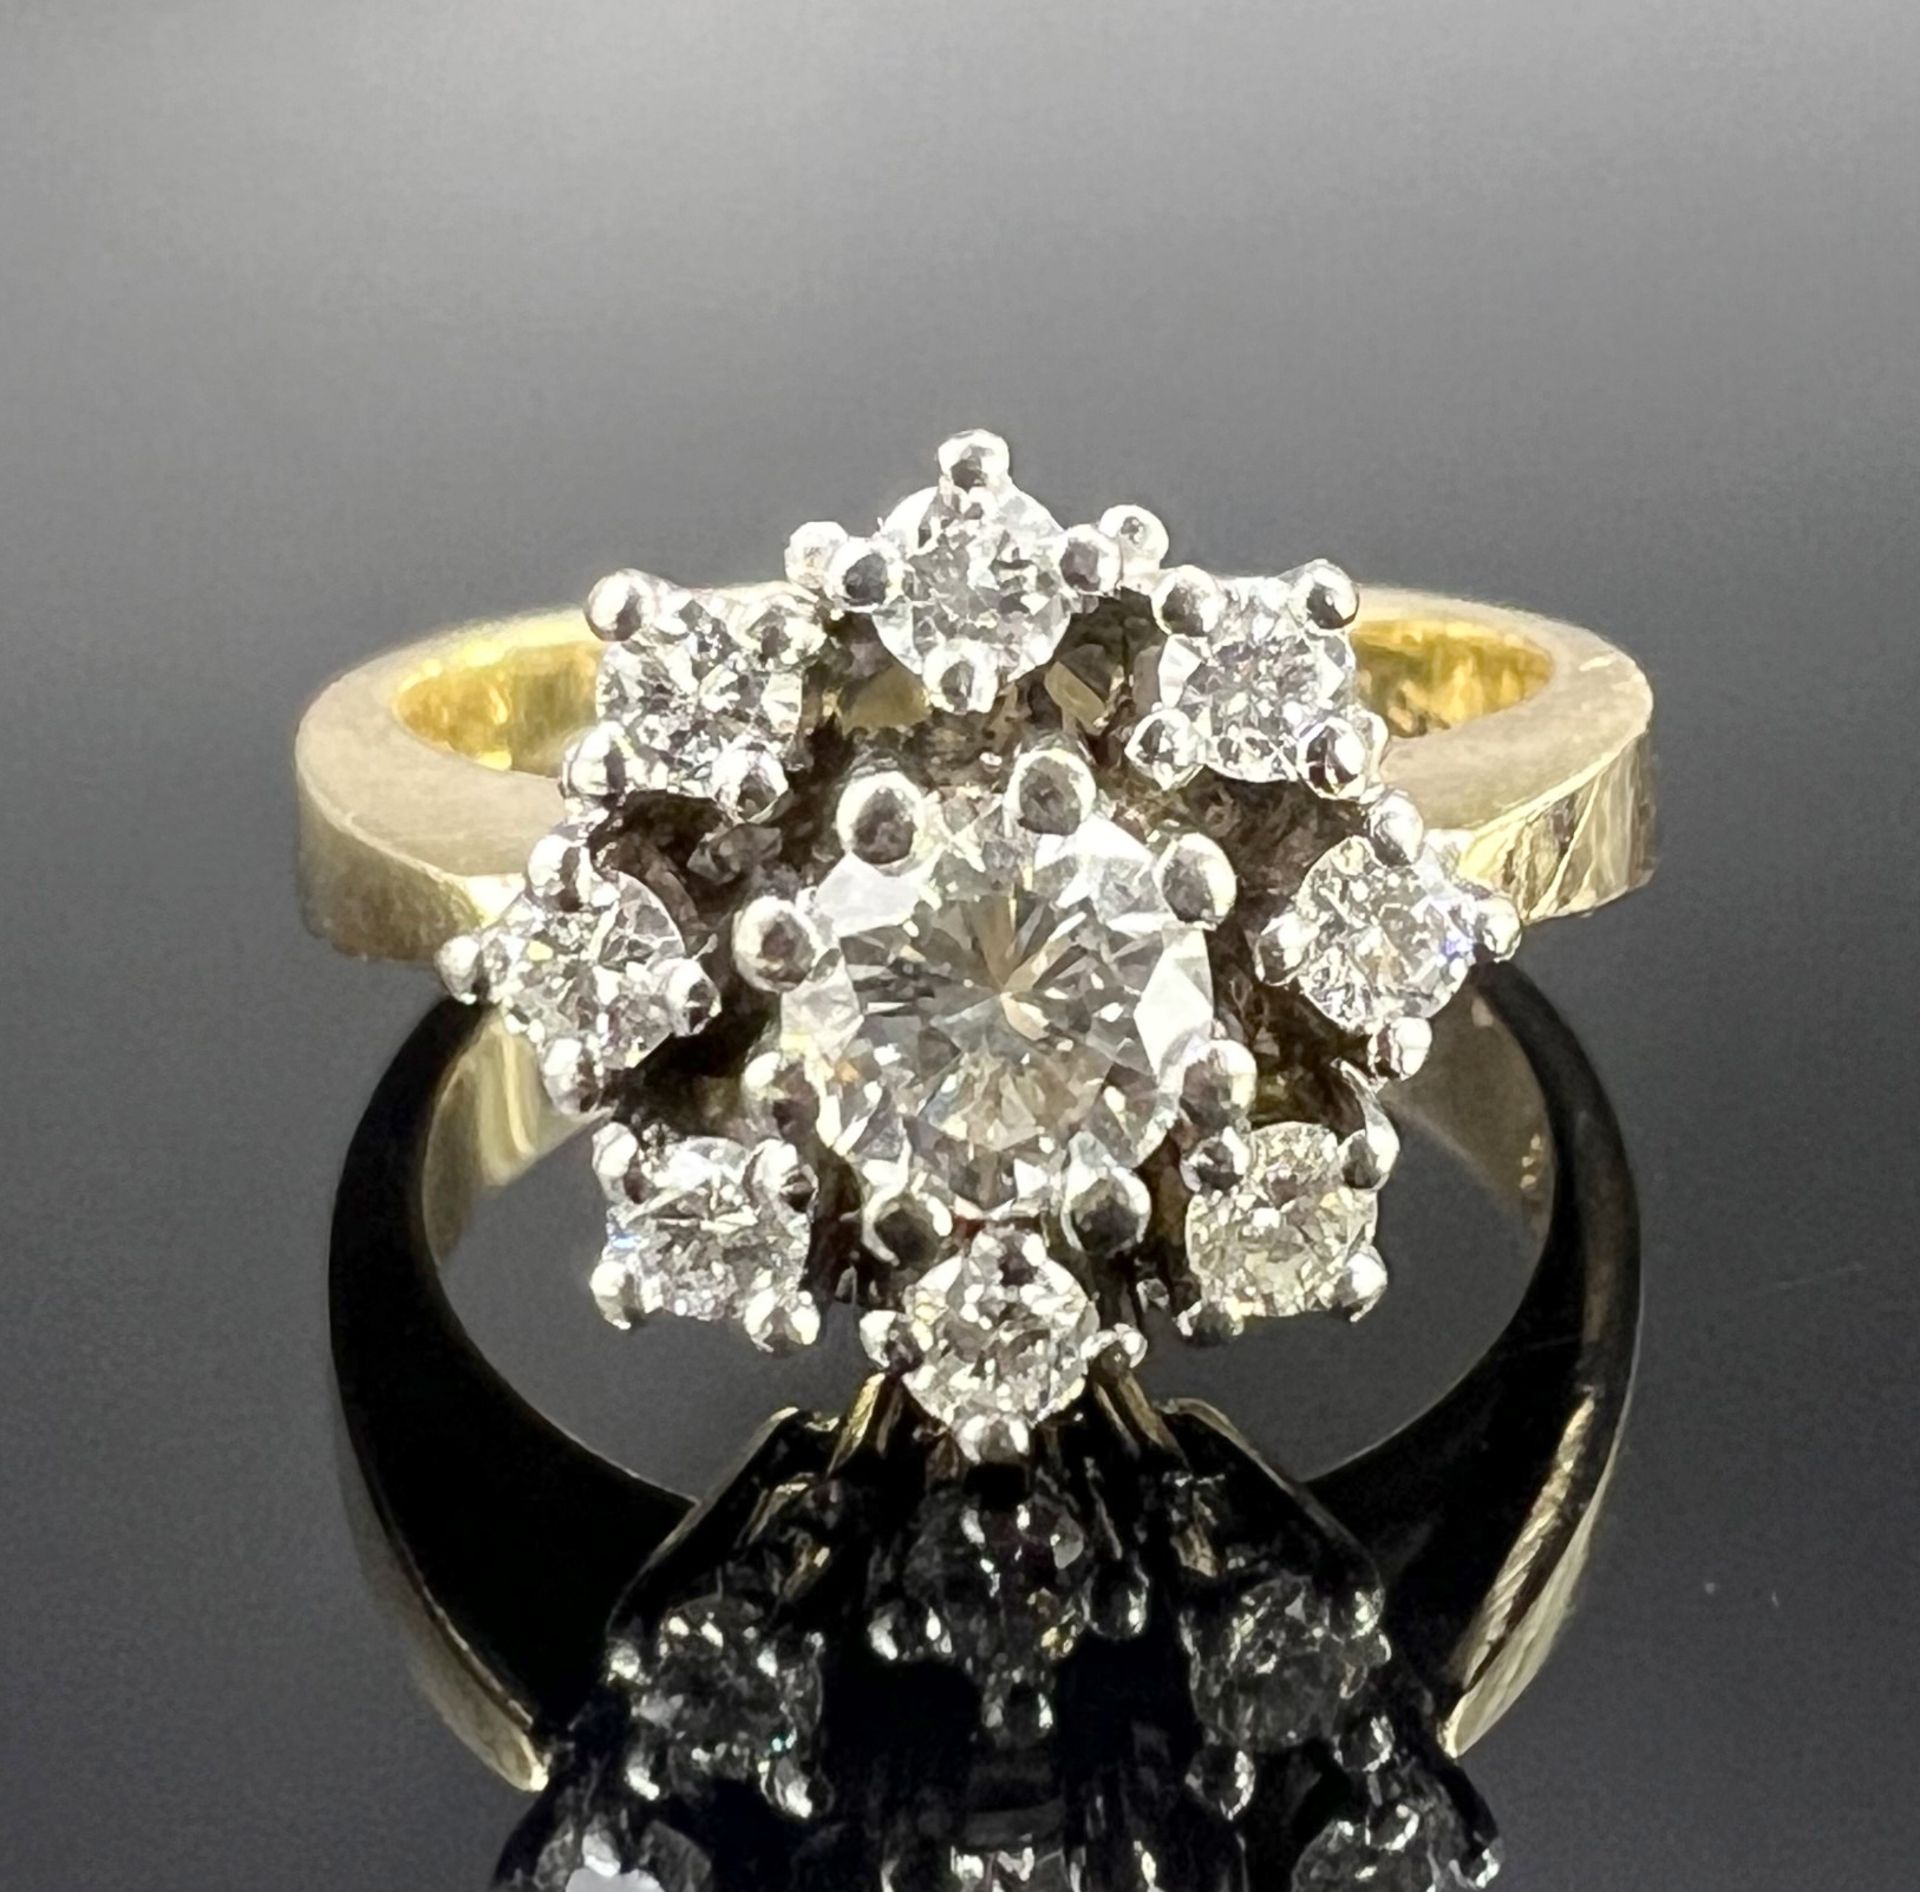 Ladies' ring in the shape of a flower. 585 yellow gold with diamonds. - Image 2 of 8